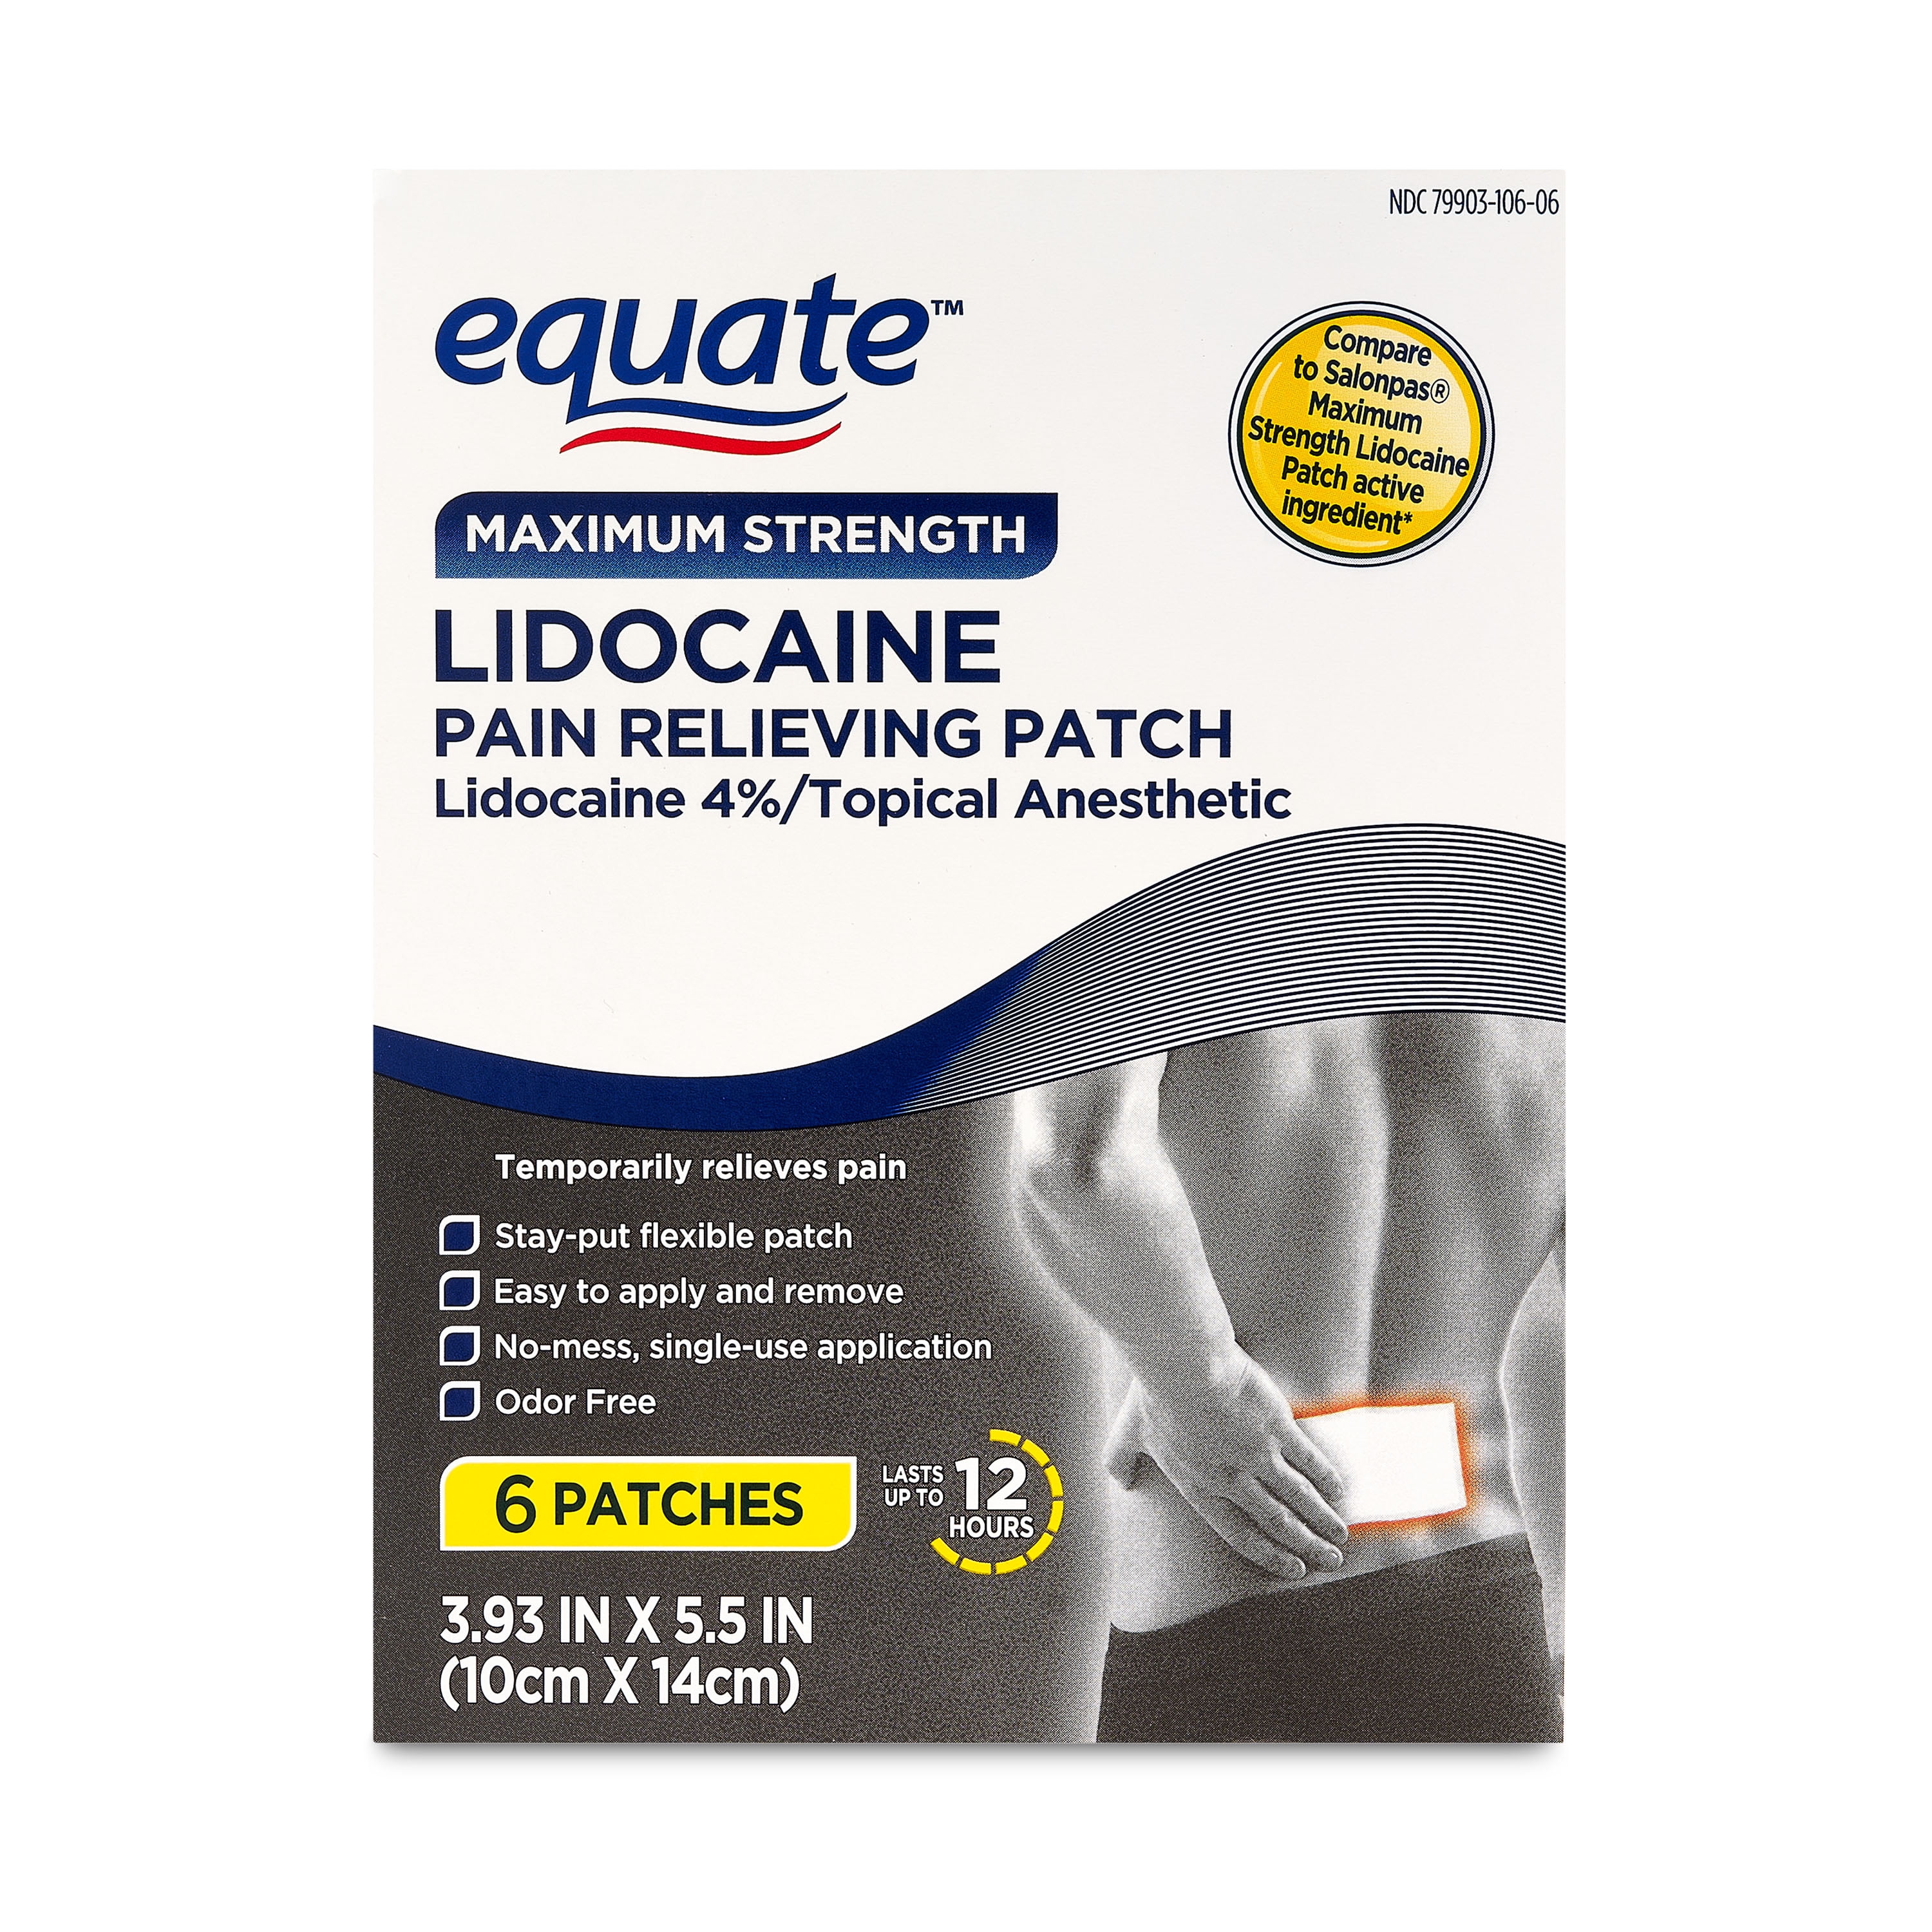 Equate Maximum Strength Lidocaine Pain Relieving Patches, 6 Count